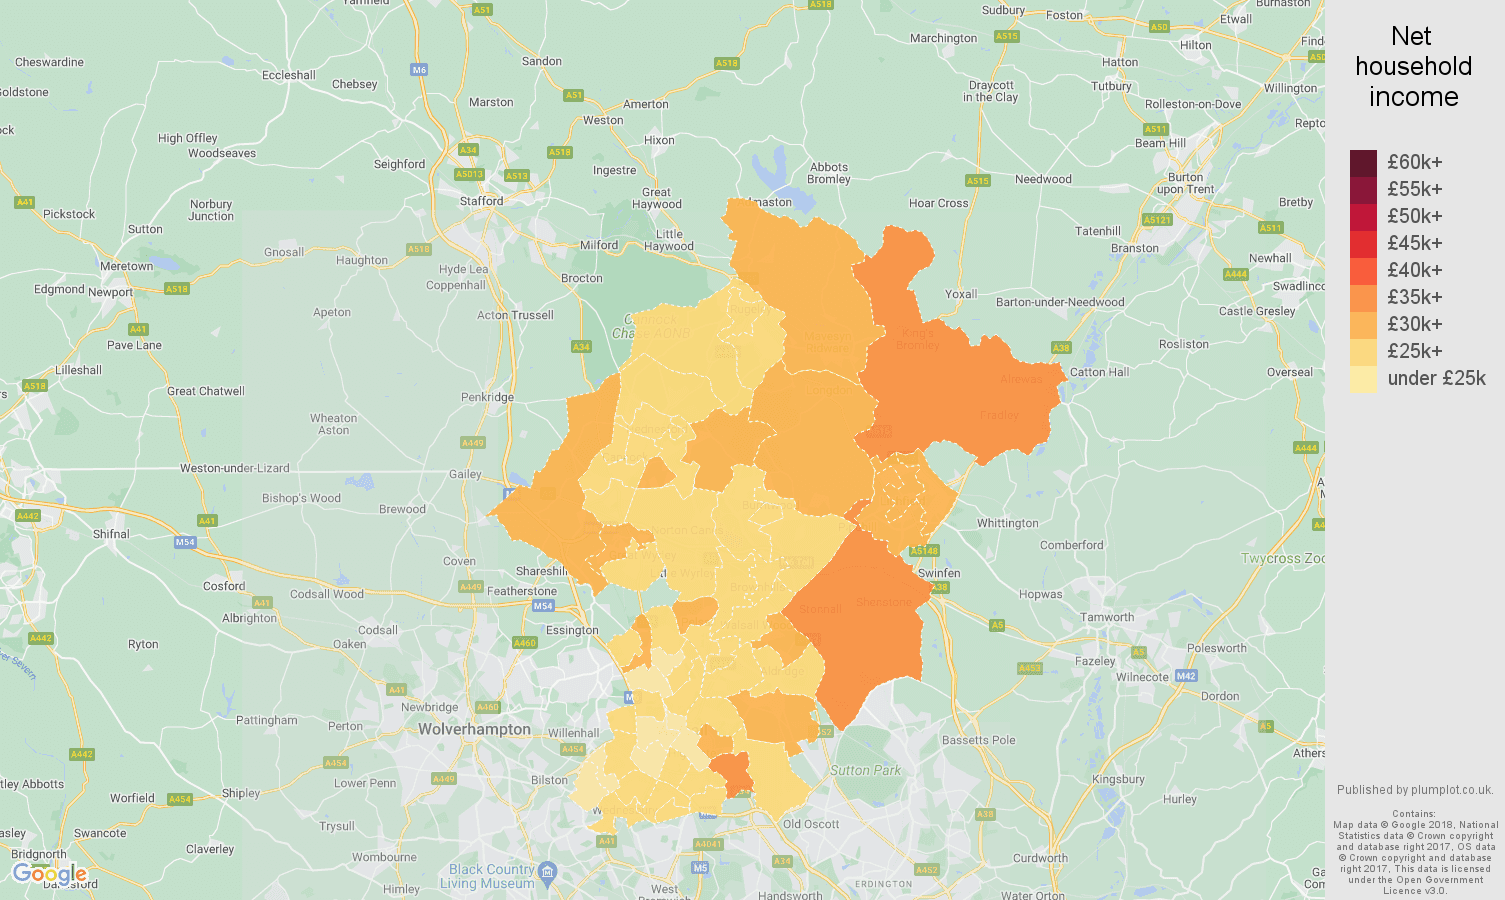 Walsall net household income map